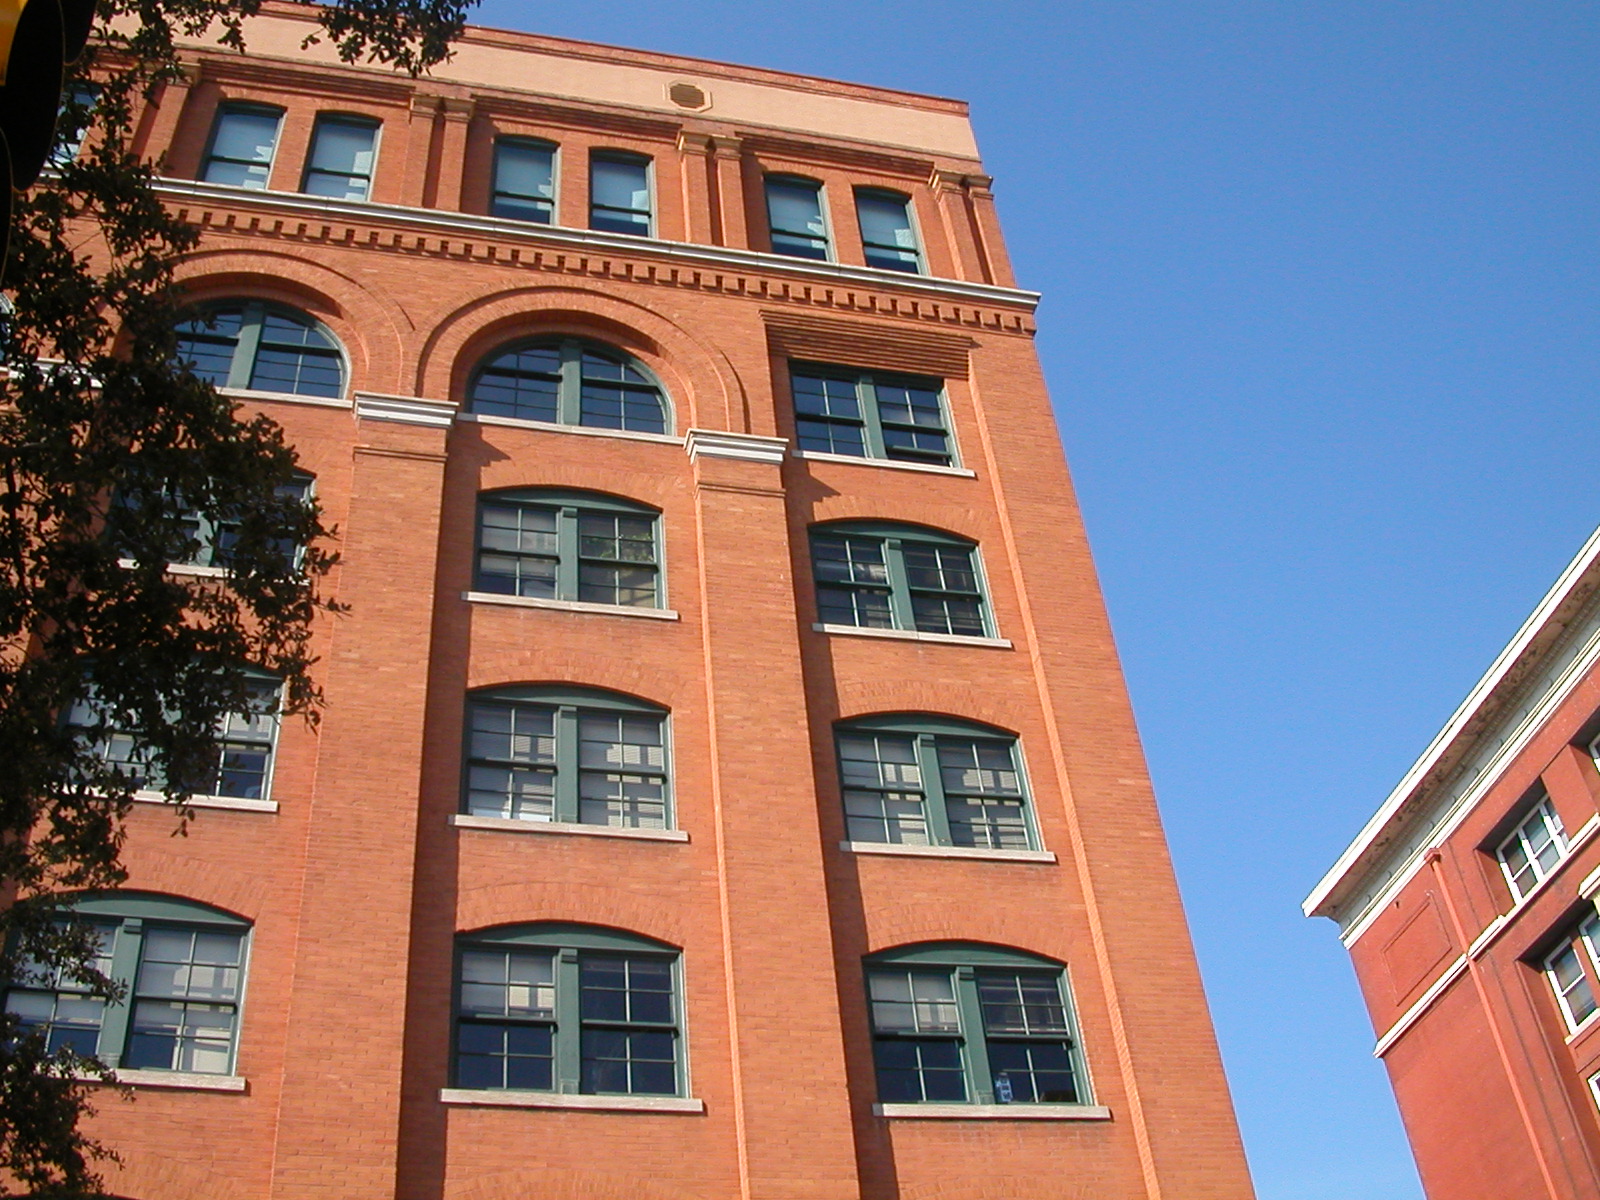 The Texas Book Depository